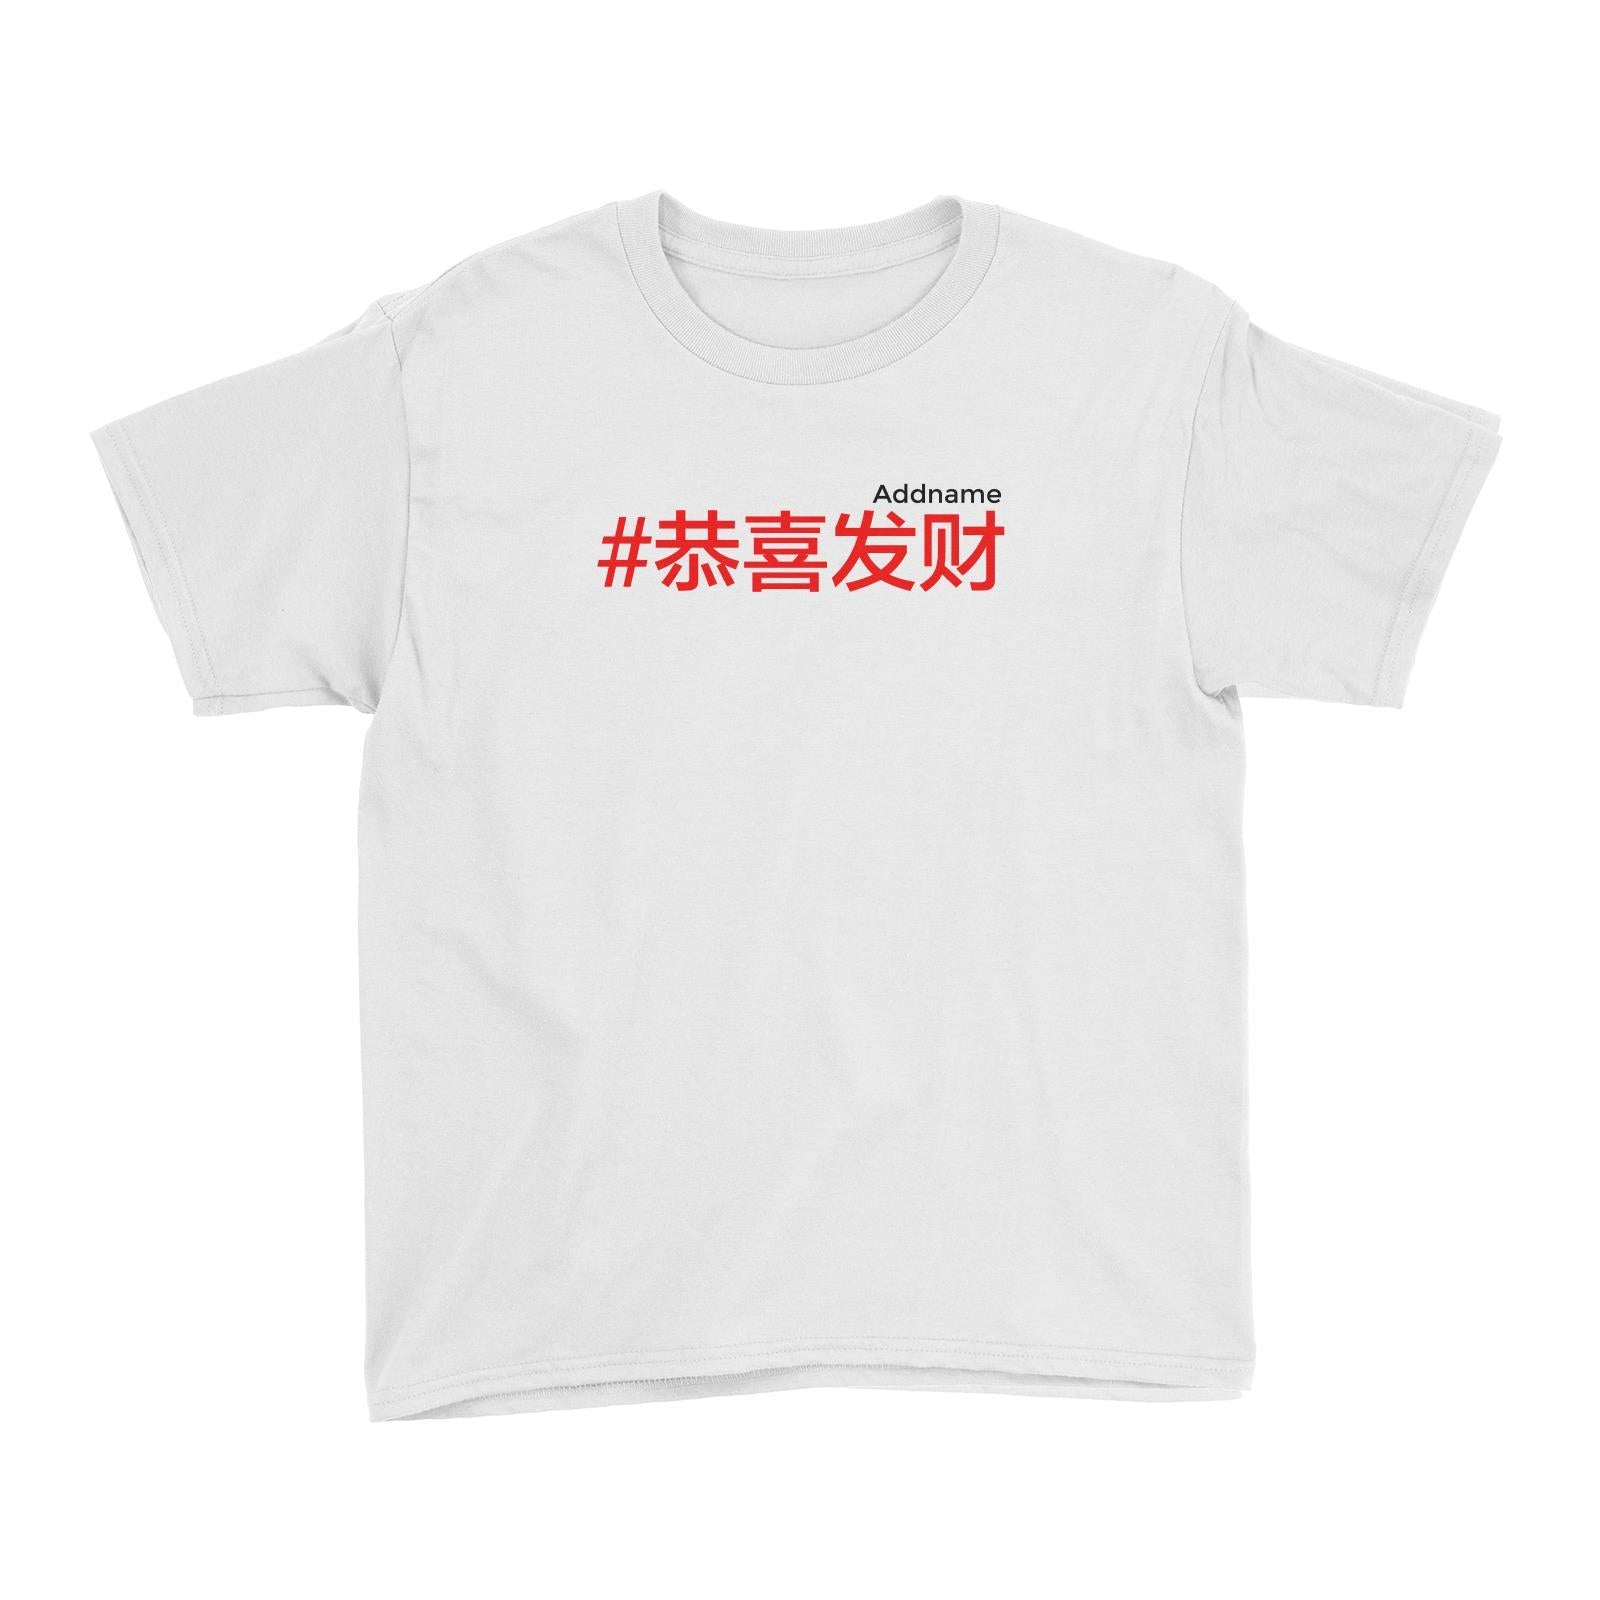 Chinese New Year Hashtag Gong Xi Fa Cai Chinese Kid's T-Shirt  Personalizable Designs